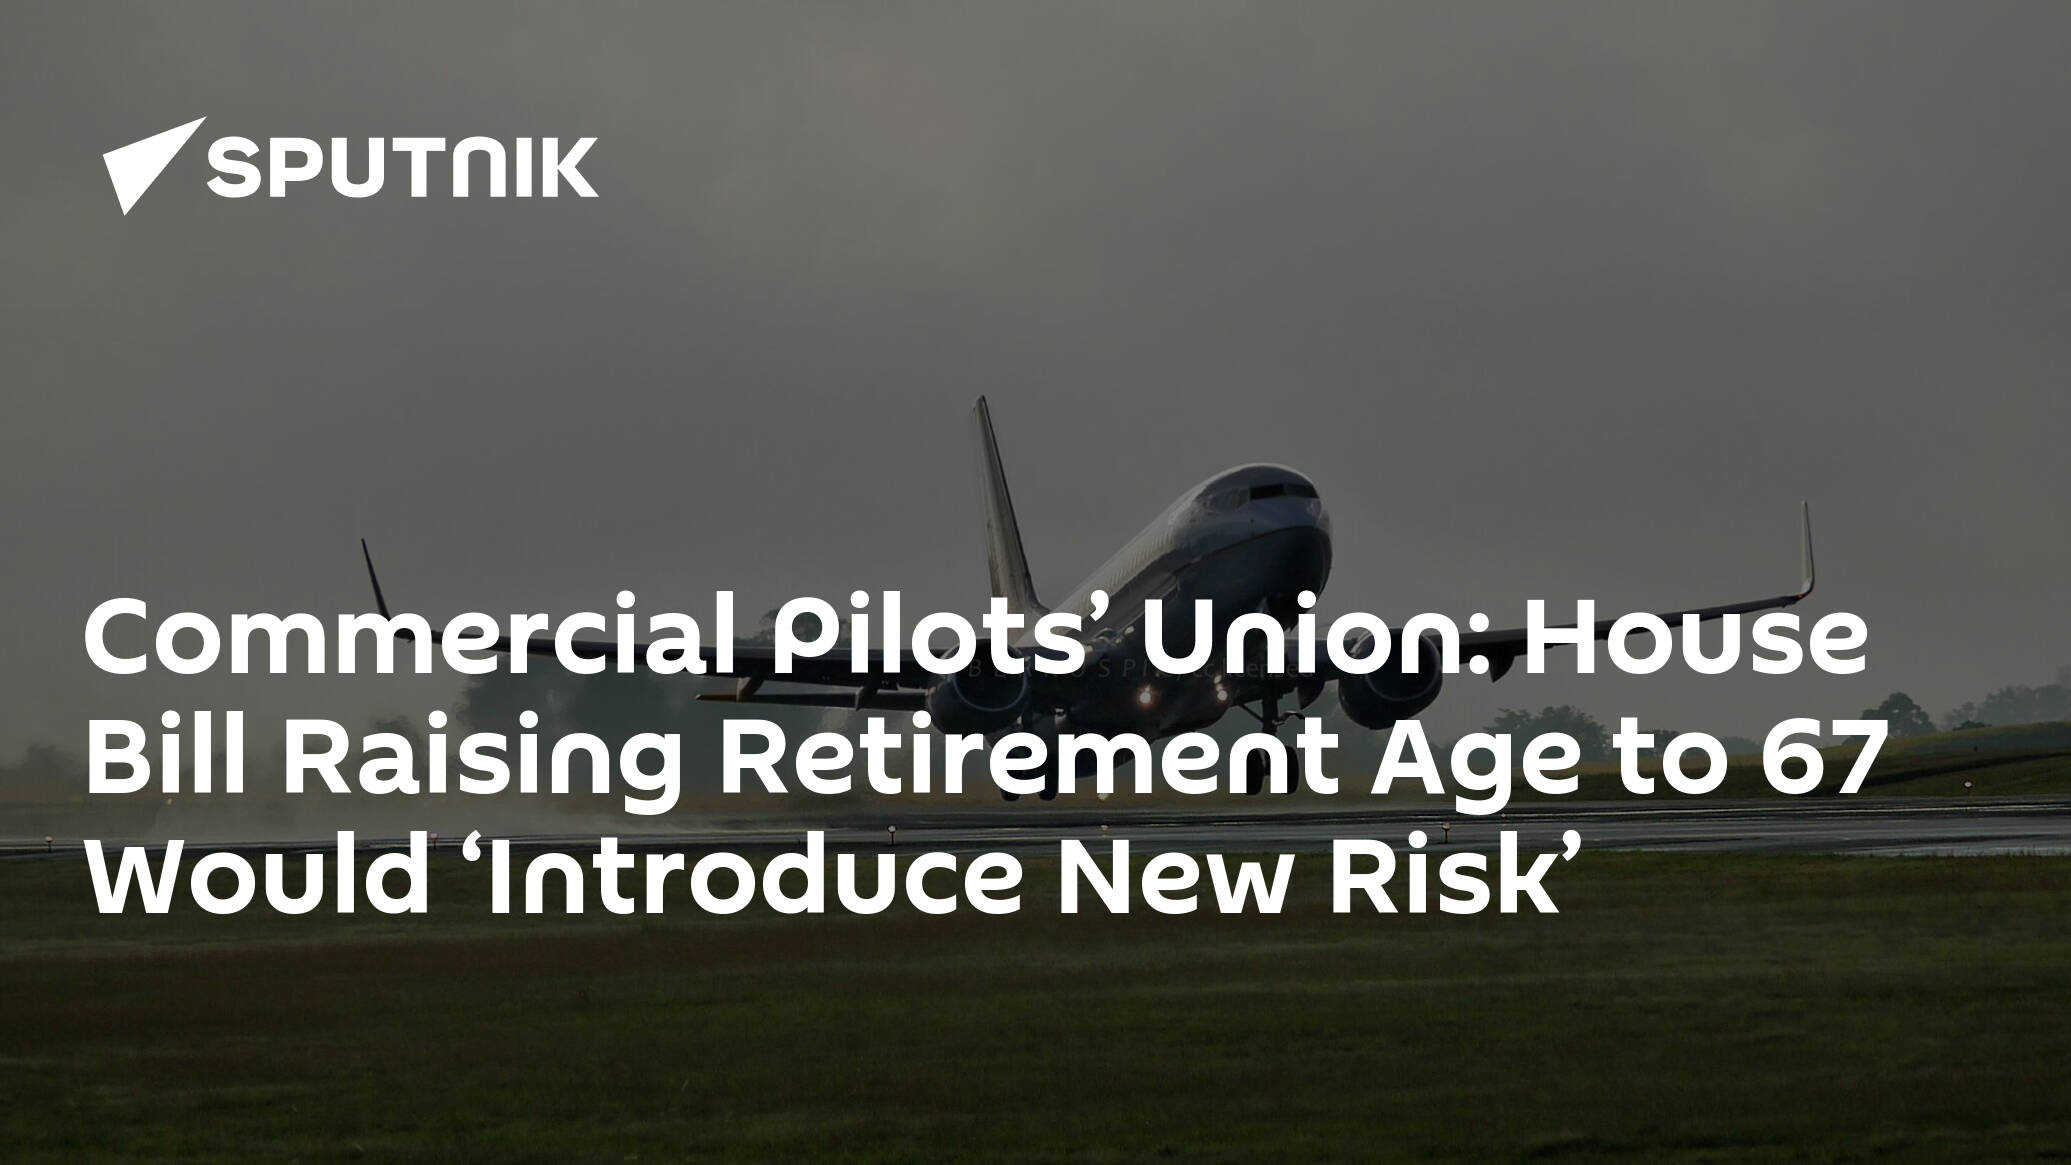 Union Says House Bill Raising Retirement Age to 67 Would ‘Introduce New